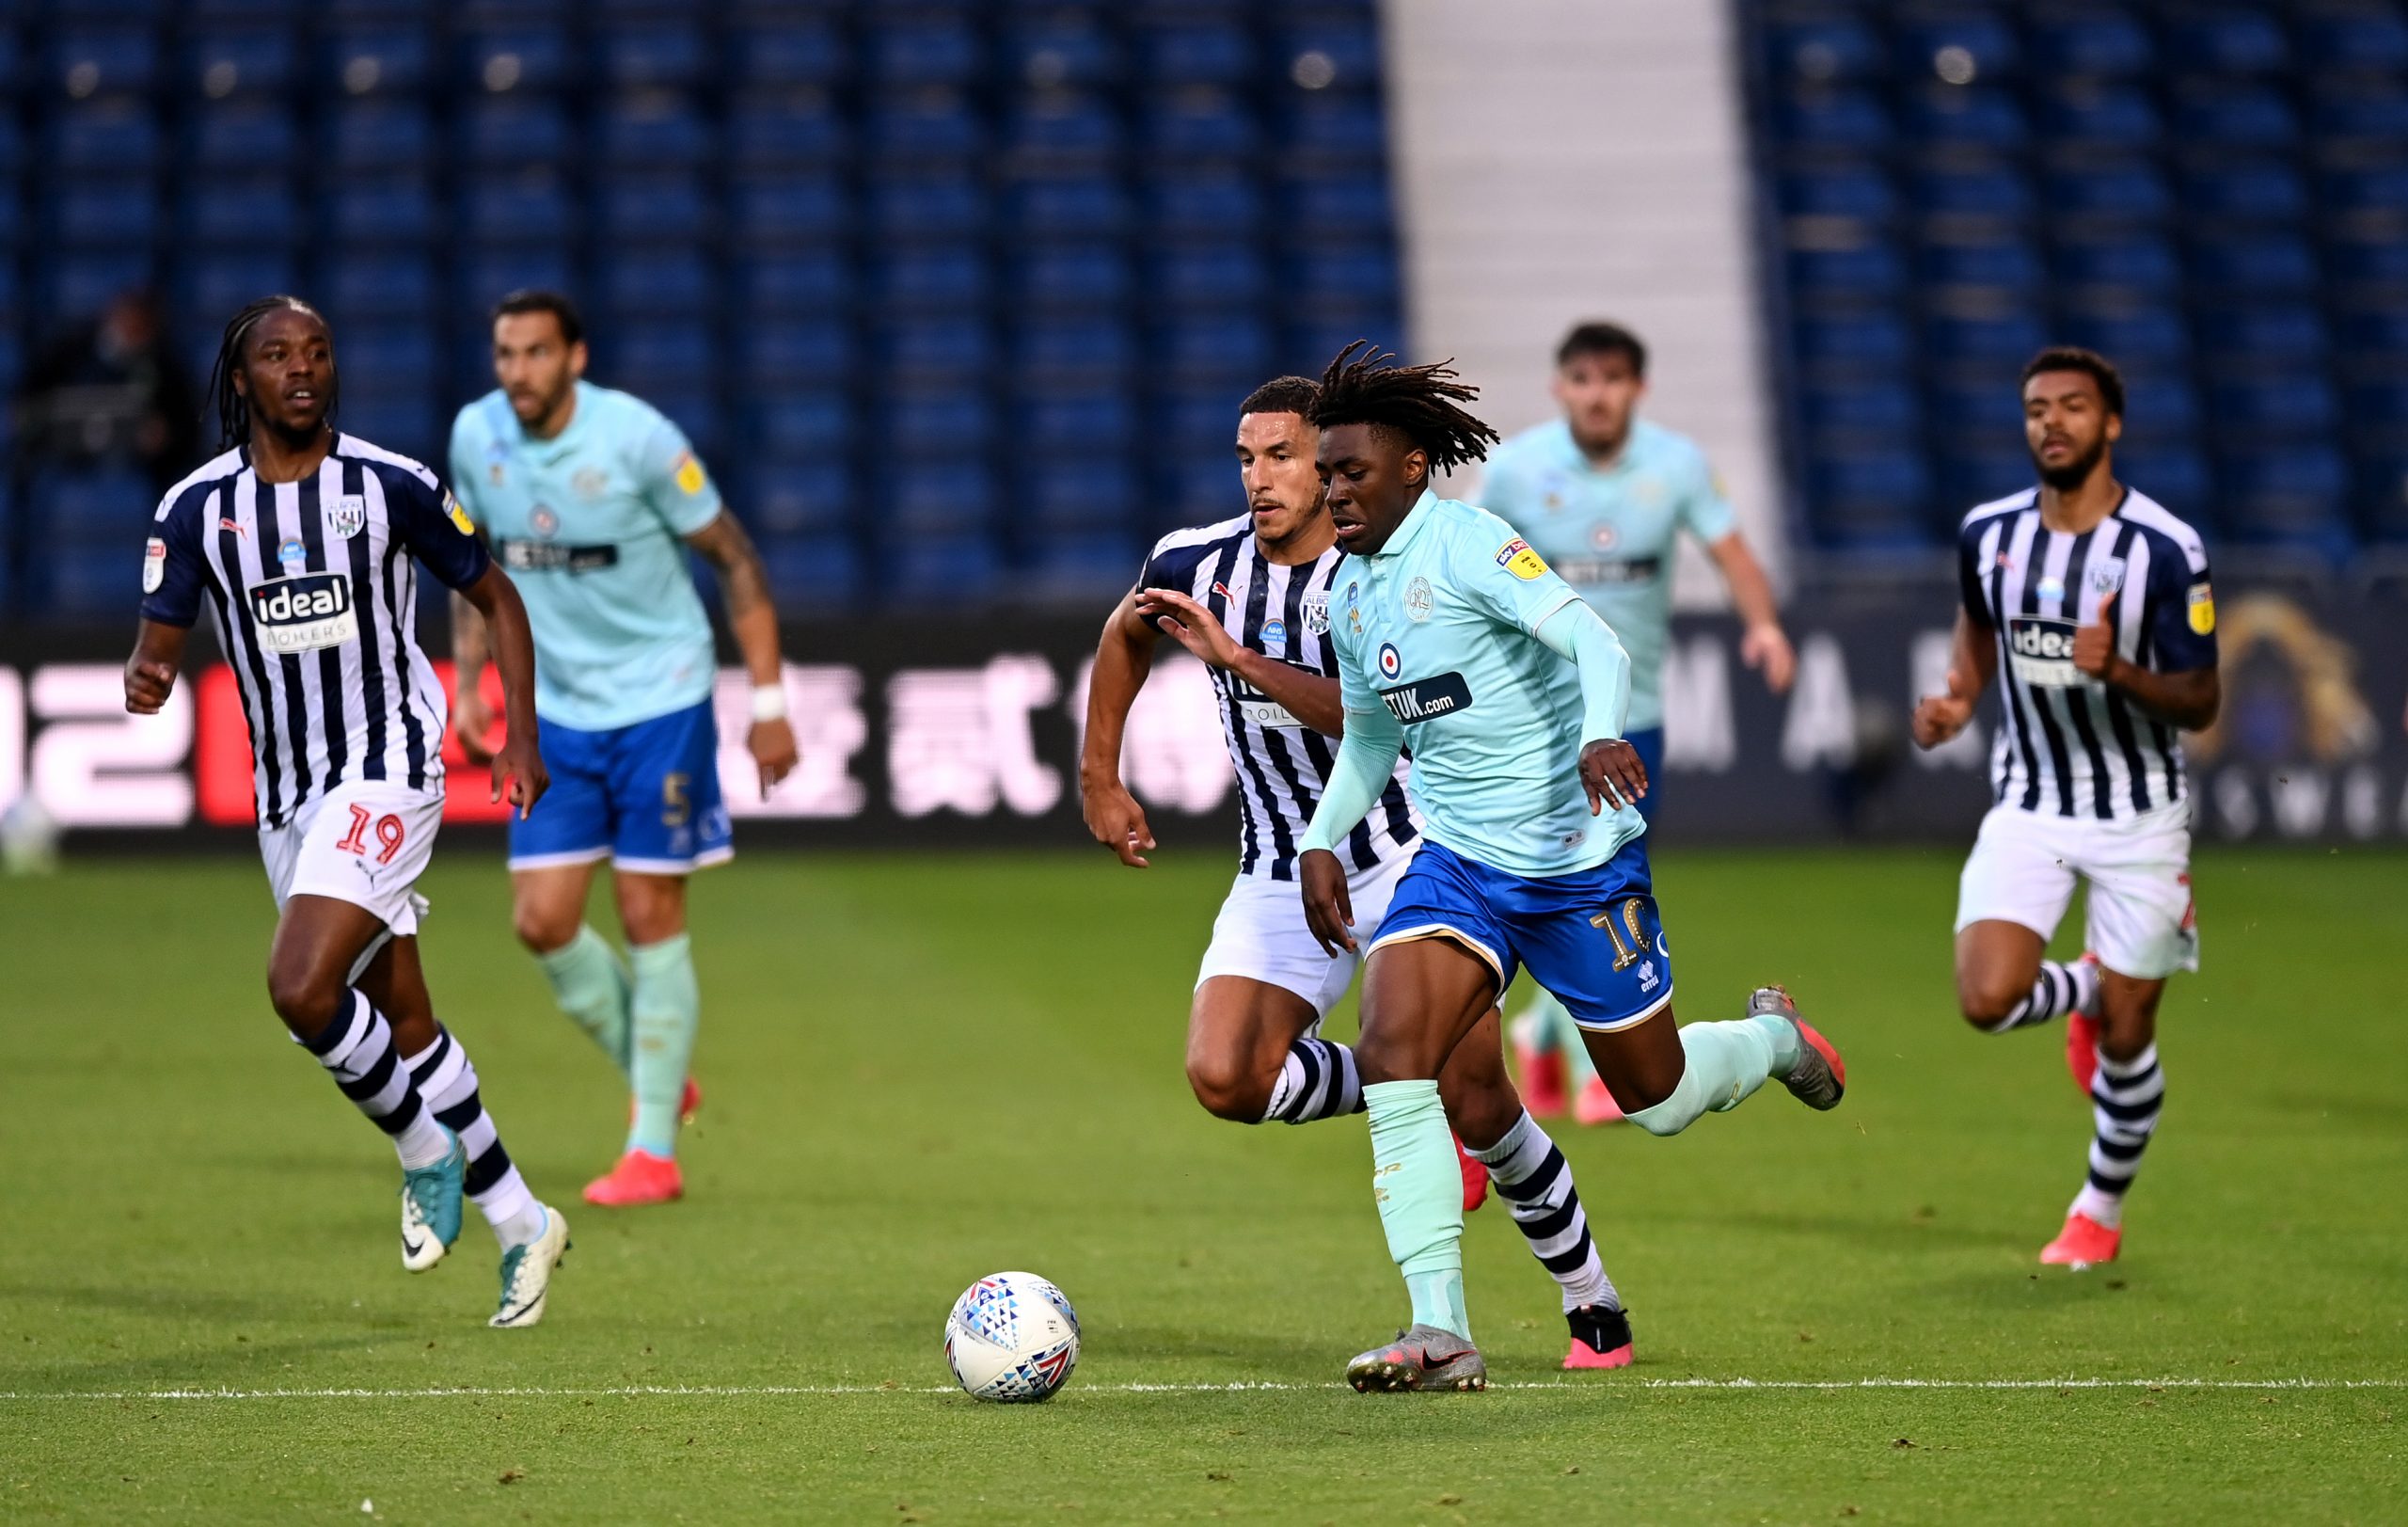 West Ham United facing fierce competition for Eberechi Eze who is in action in the picture